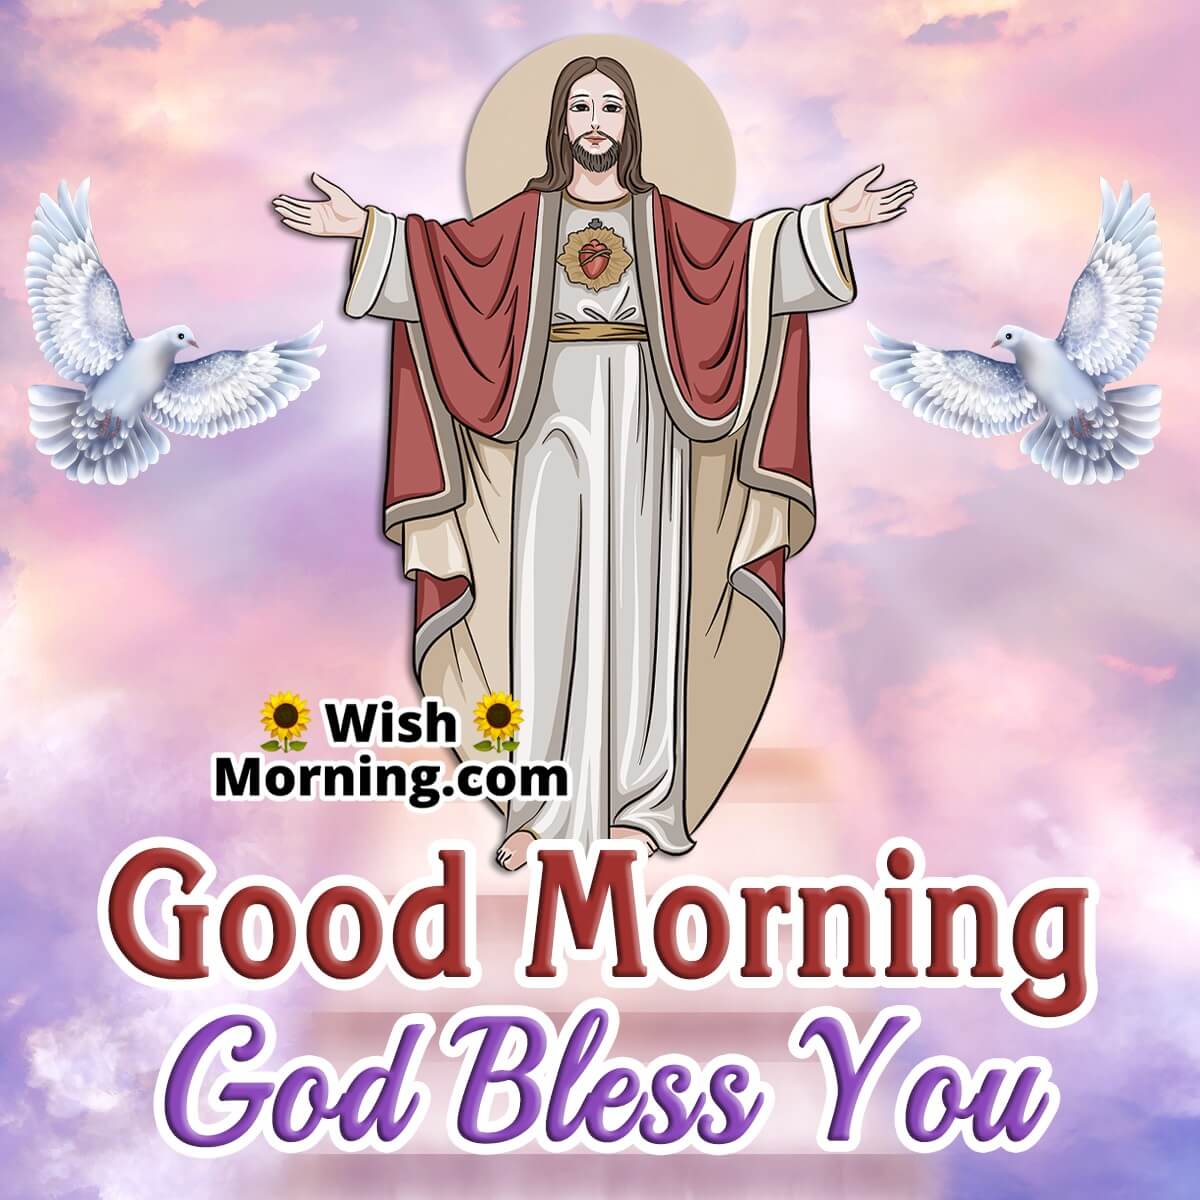 Over 999+ Stunning Good Morning Jesus Images – Impeccable Assortment of Full 4K Good Morning Jesus Images